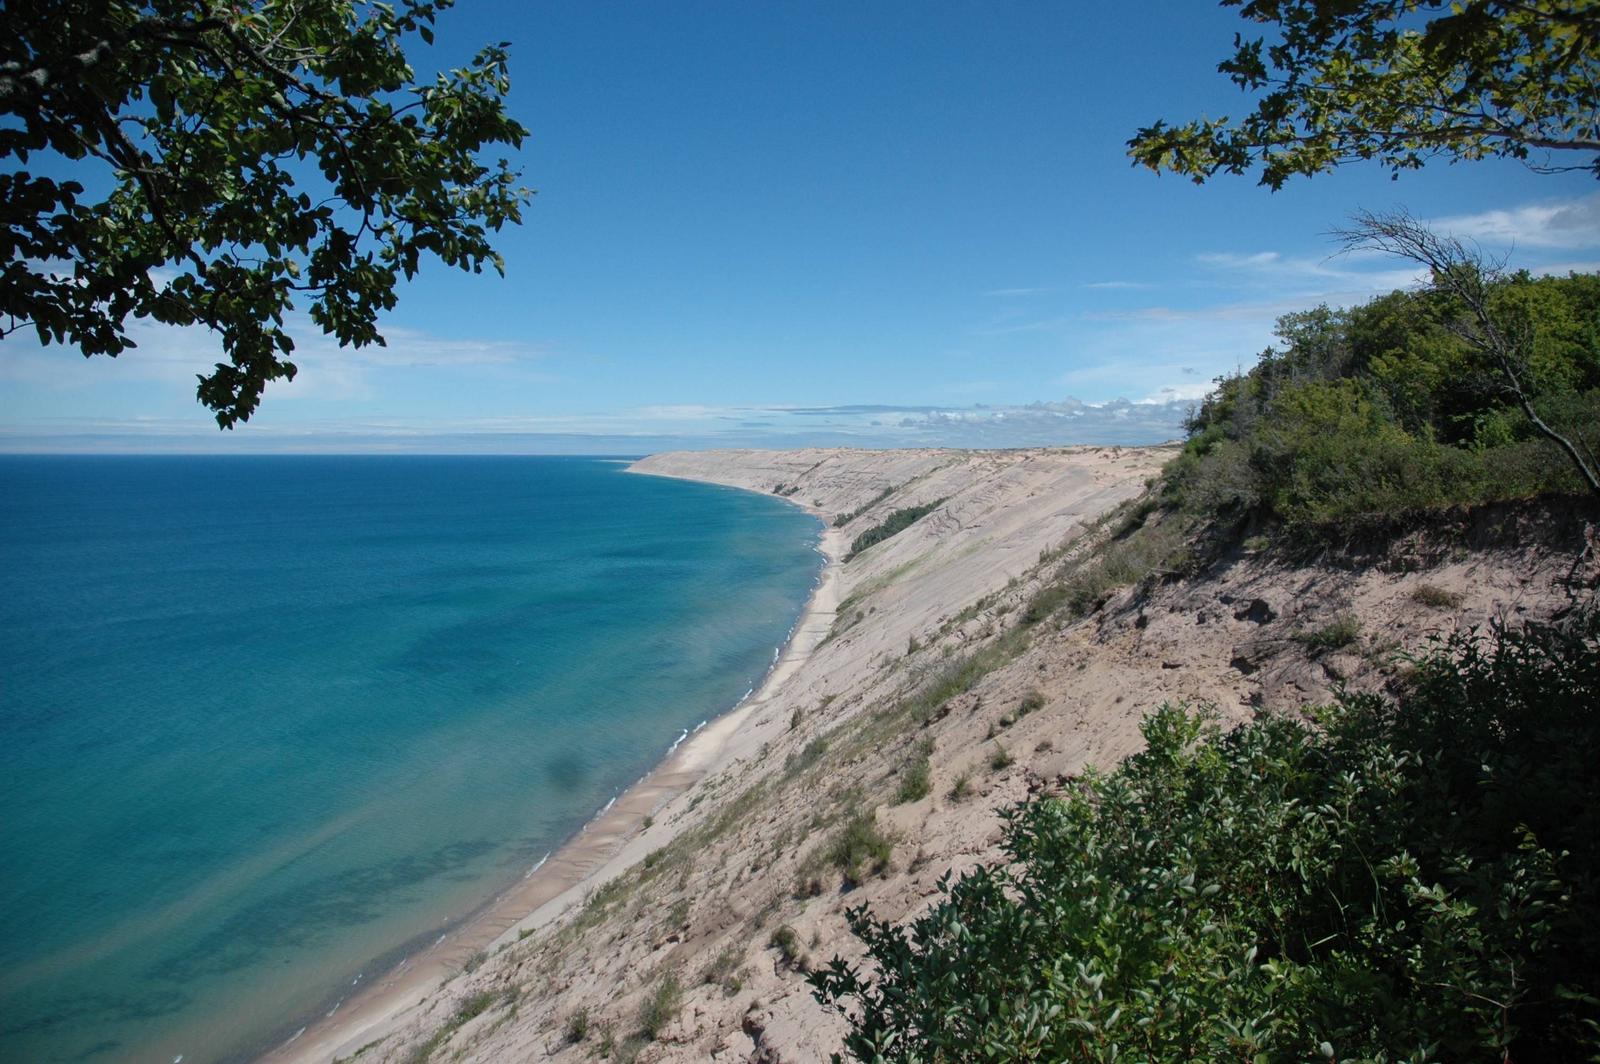 View on the Grand Sable Dunes from the LogslidePictured Rocks National Lakeshore Backcountry Camping PermitView on the Grand Sable Dunes from the Logslide